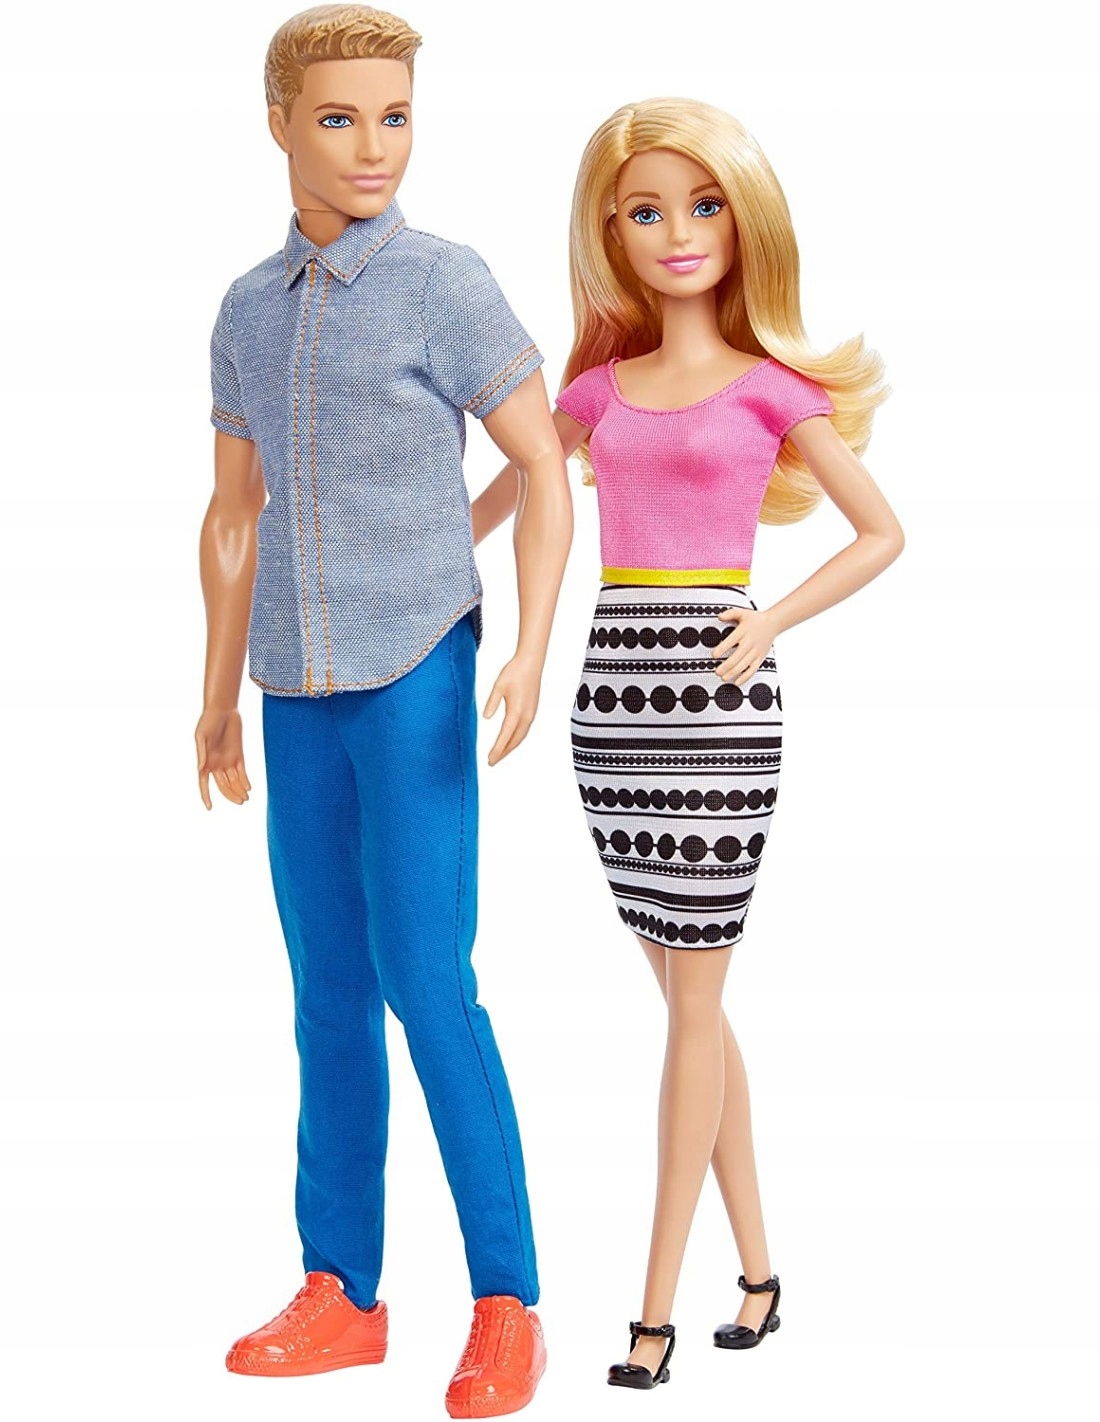 BARBIE AND KEN DOLL ON A DATE DLH76 Manufacturer's code DLH76